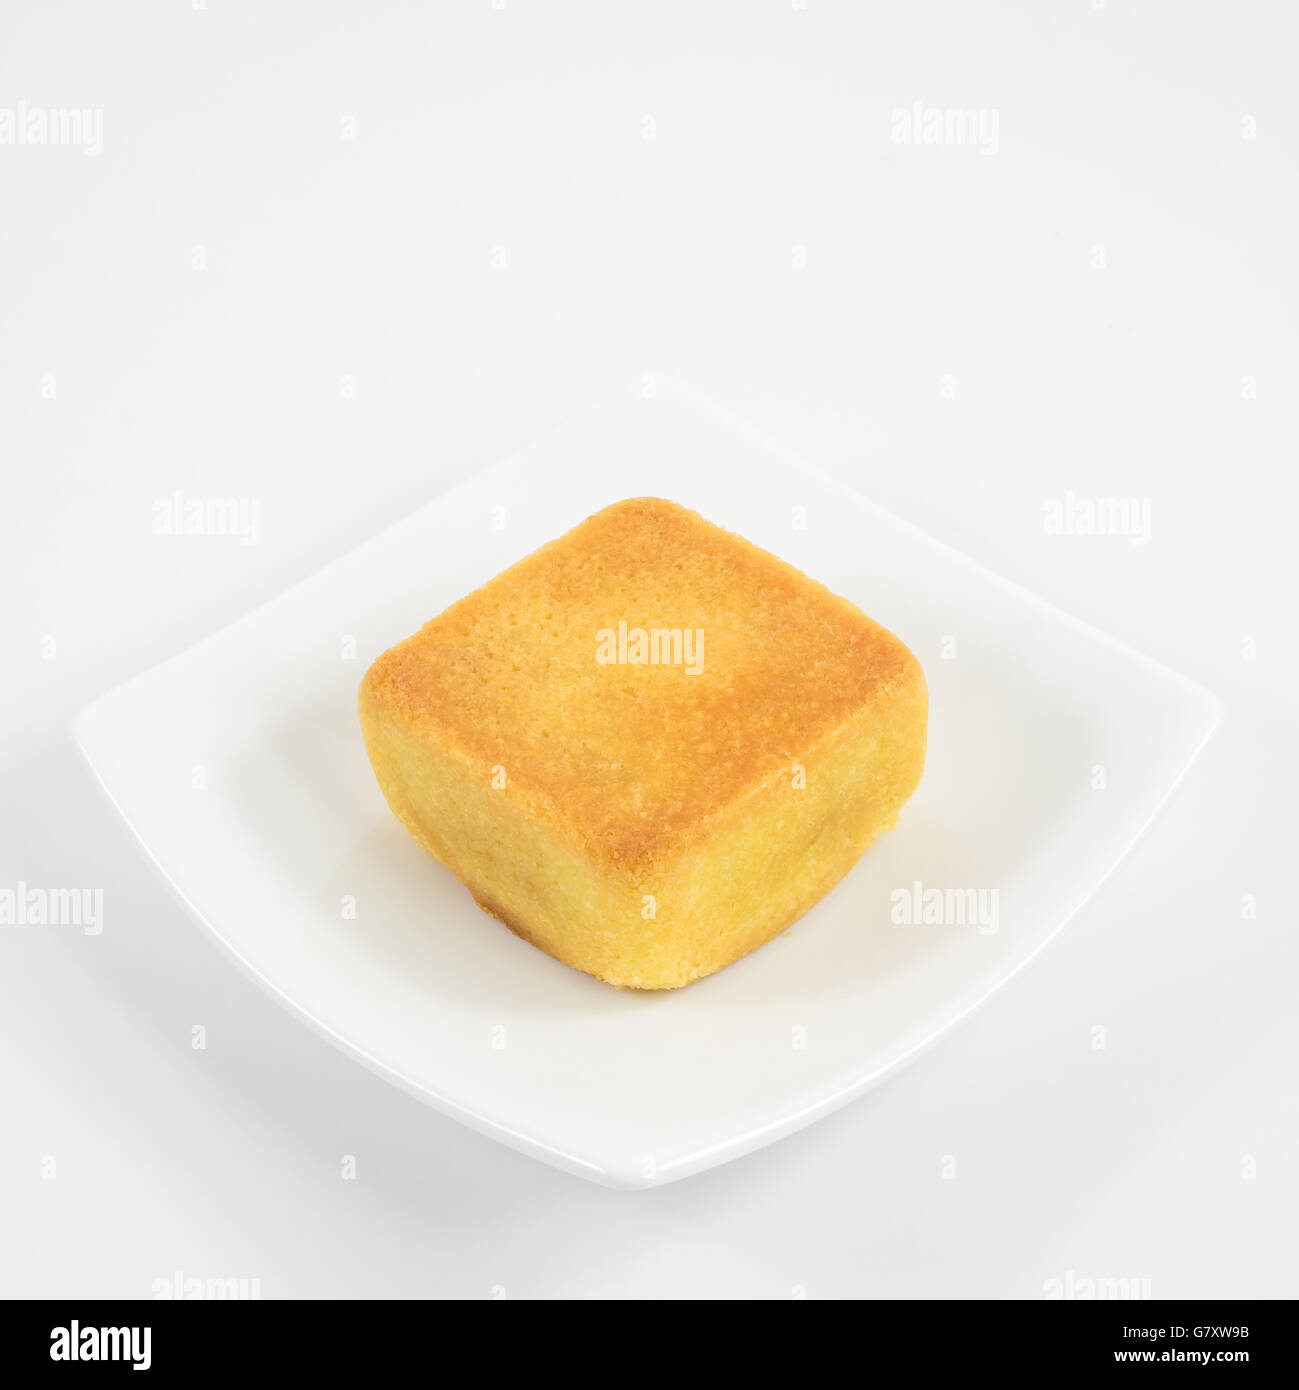 Hand Drawn Square PNG Image, Hand Drawn Square Pineapple Cake, Pineapple  Cake, Hand Draw, Pastry PNG Image For Free Download